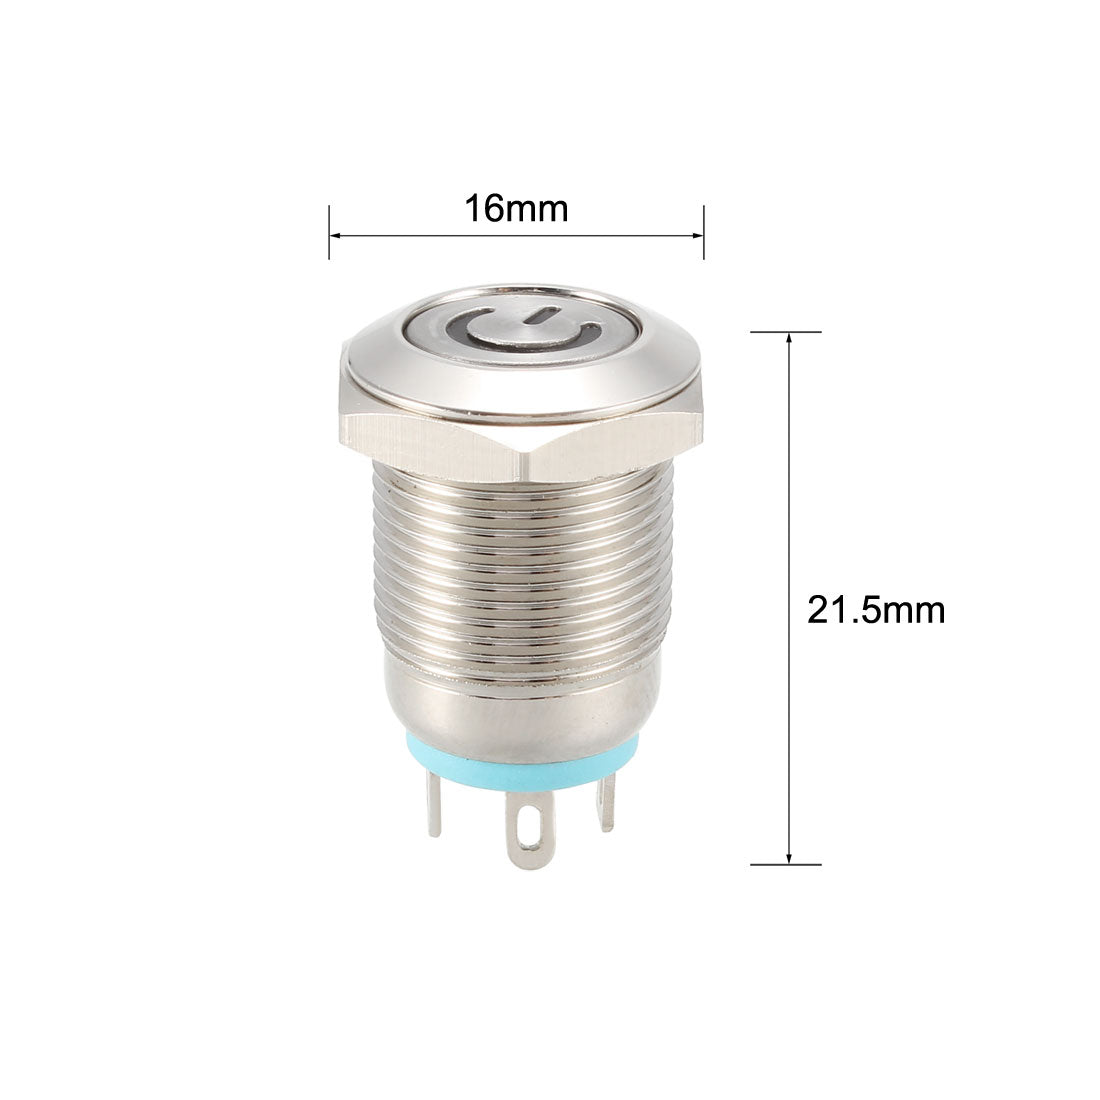 uxcell Uxcell Momentary Metal Push Button Switch Flat Head 12mm Mounting Dia 1NO 12V LED Light